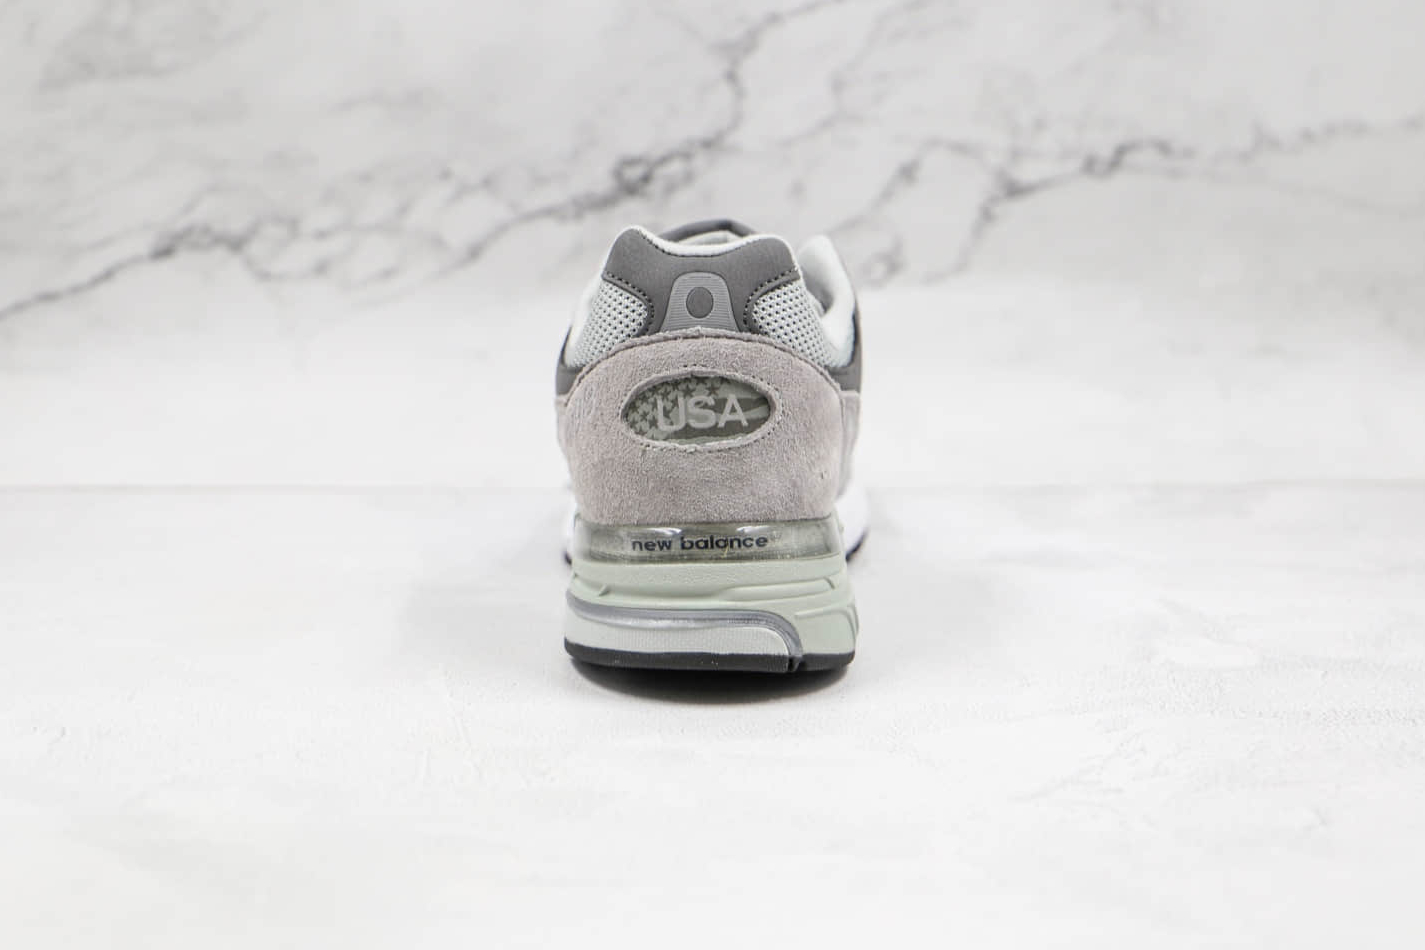 New Balance 993 Made in USA: Grey White MR993GL - Best Price & Quality